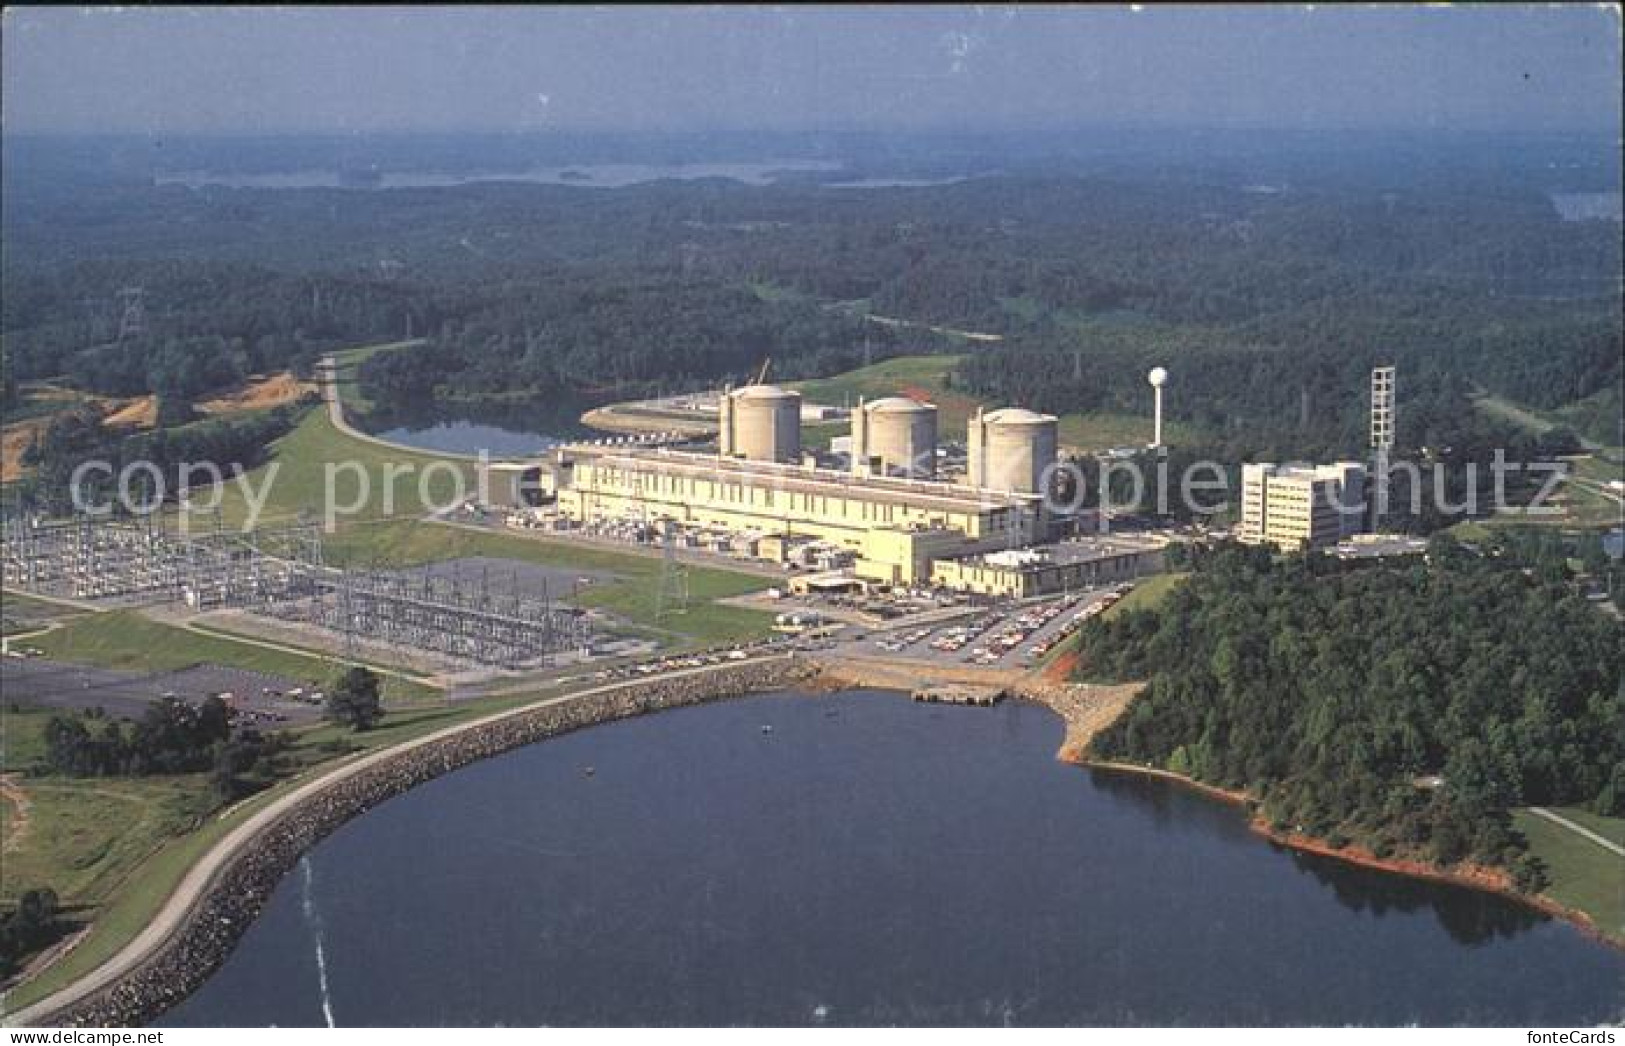 72122006 Clemson Oconee Nuclear Station Air View - Other & Unclassified